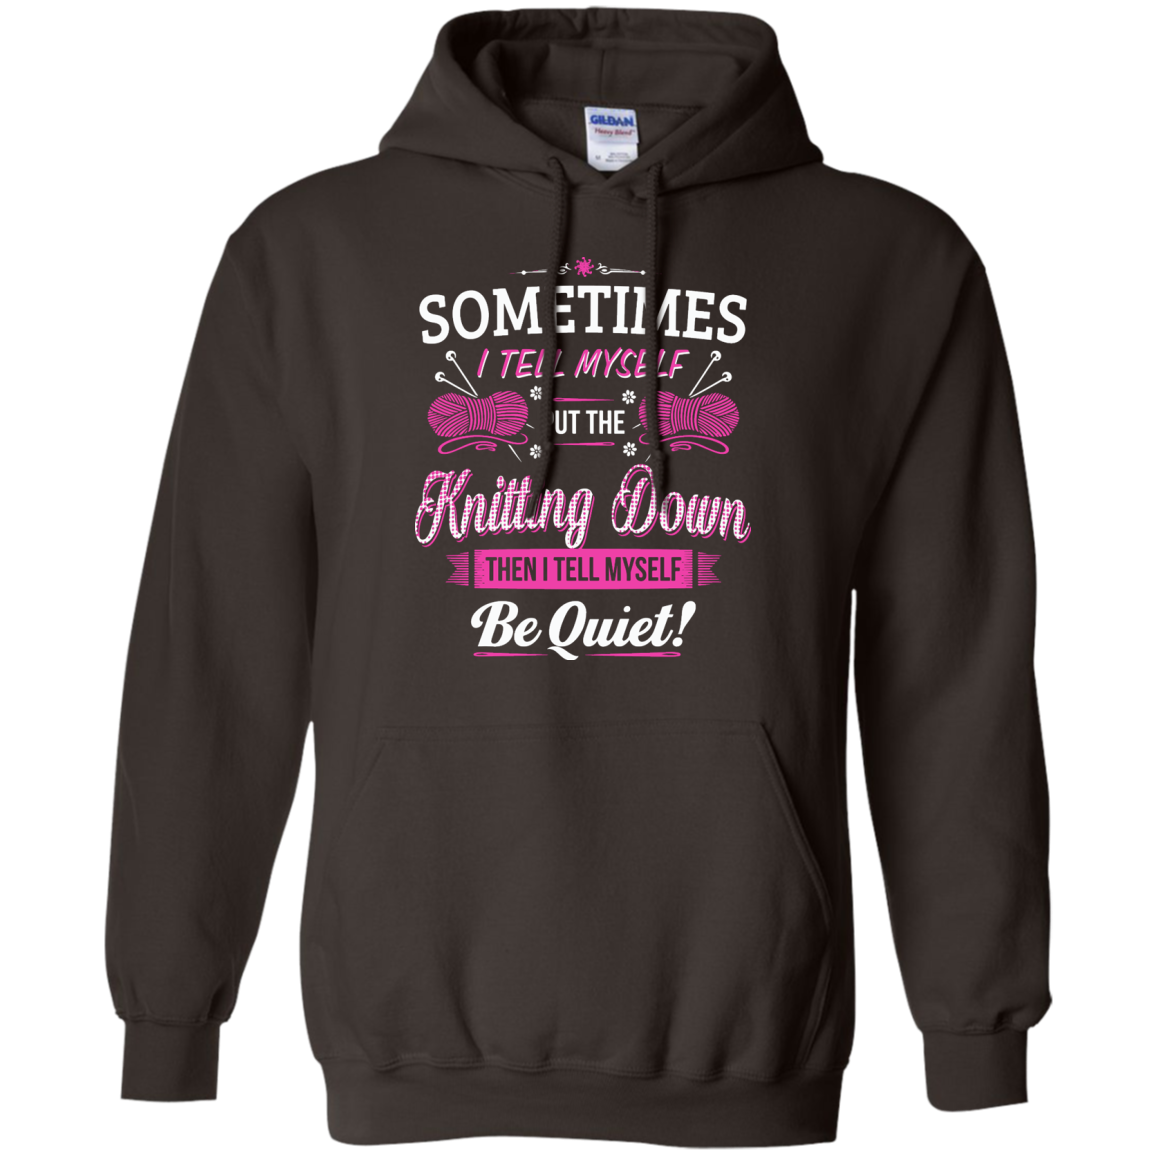 Put the Knitting Down Pullover Hoodies - Crafter4Life - 6